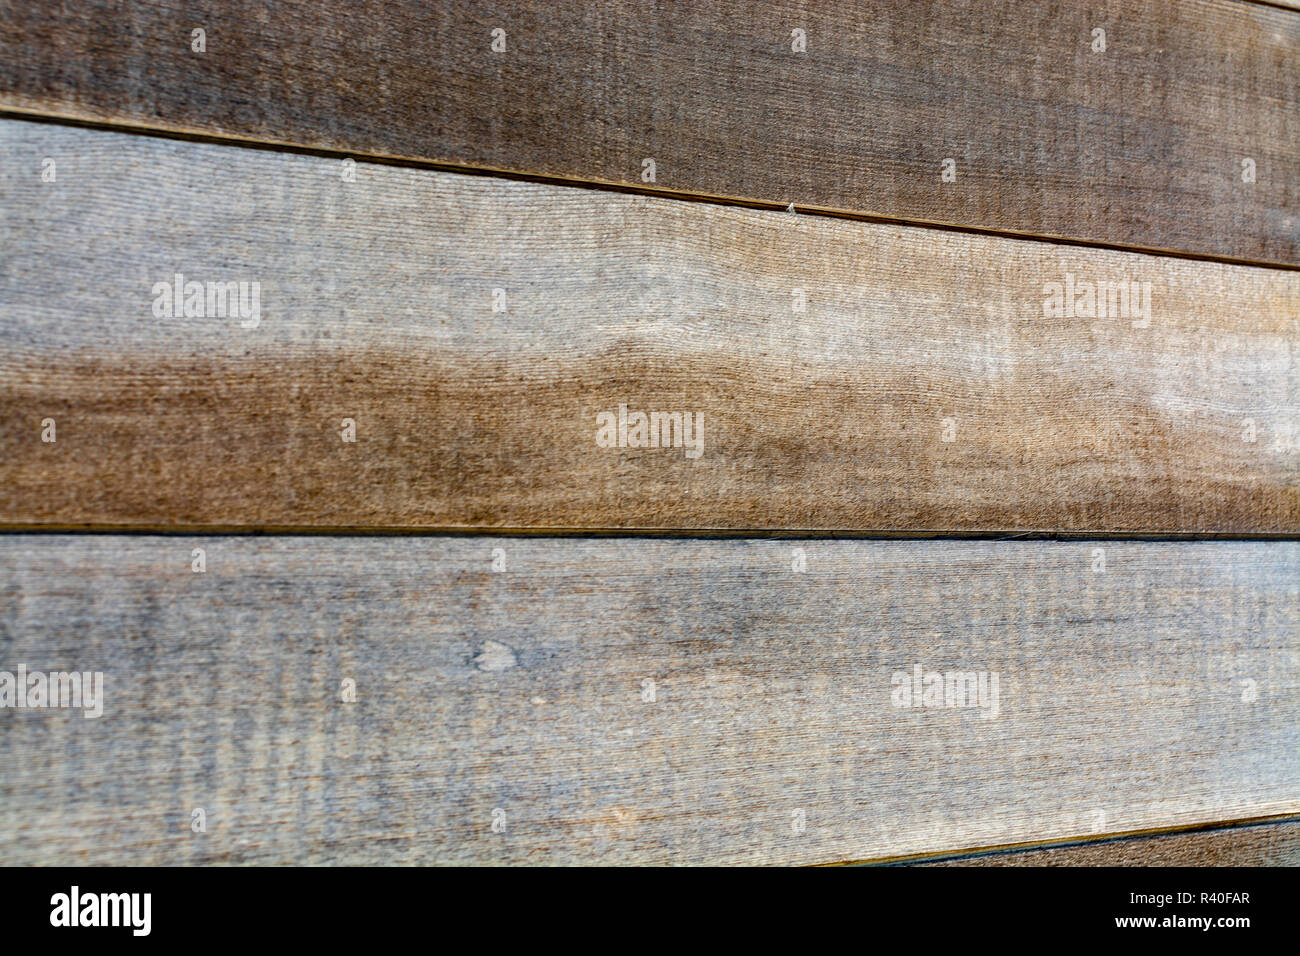 Background texture of rustic brown natural hardwood with a distinctive wood grain pattern for use a design template in a full frame landscape view Stock Photo